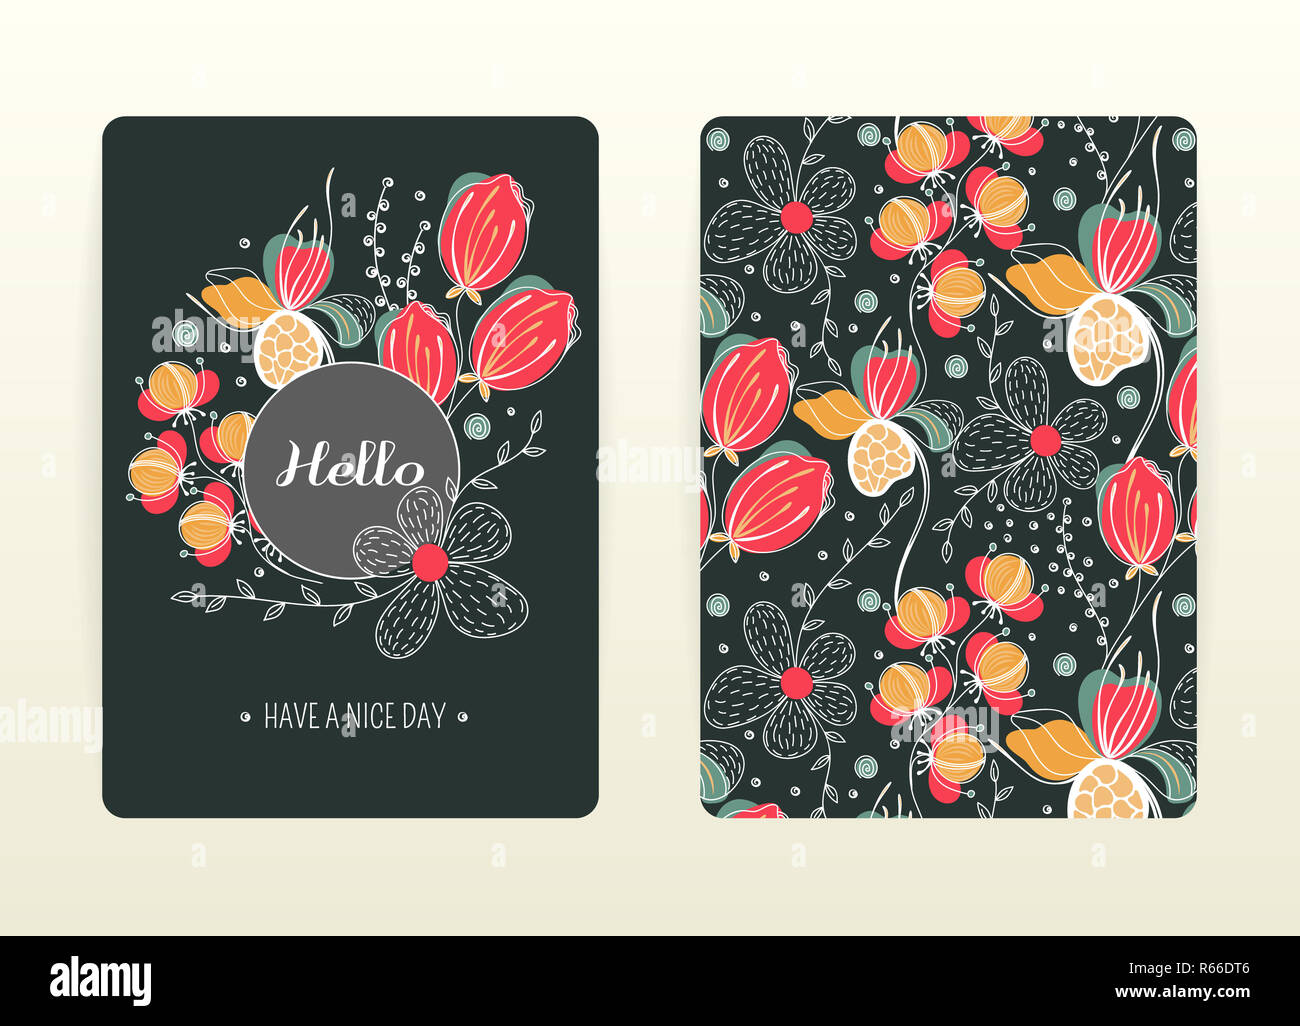 Cover design with floral pattern. Hand drawn creative flowers. Colorful artistic background with blossom Stock Photo